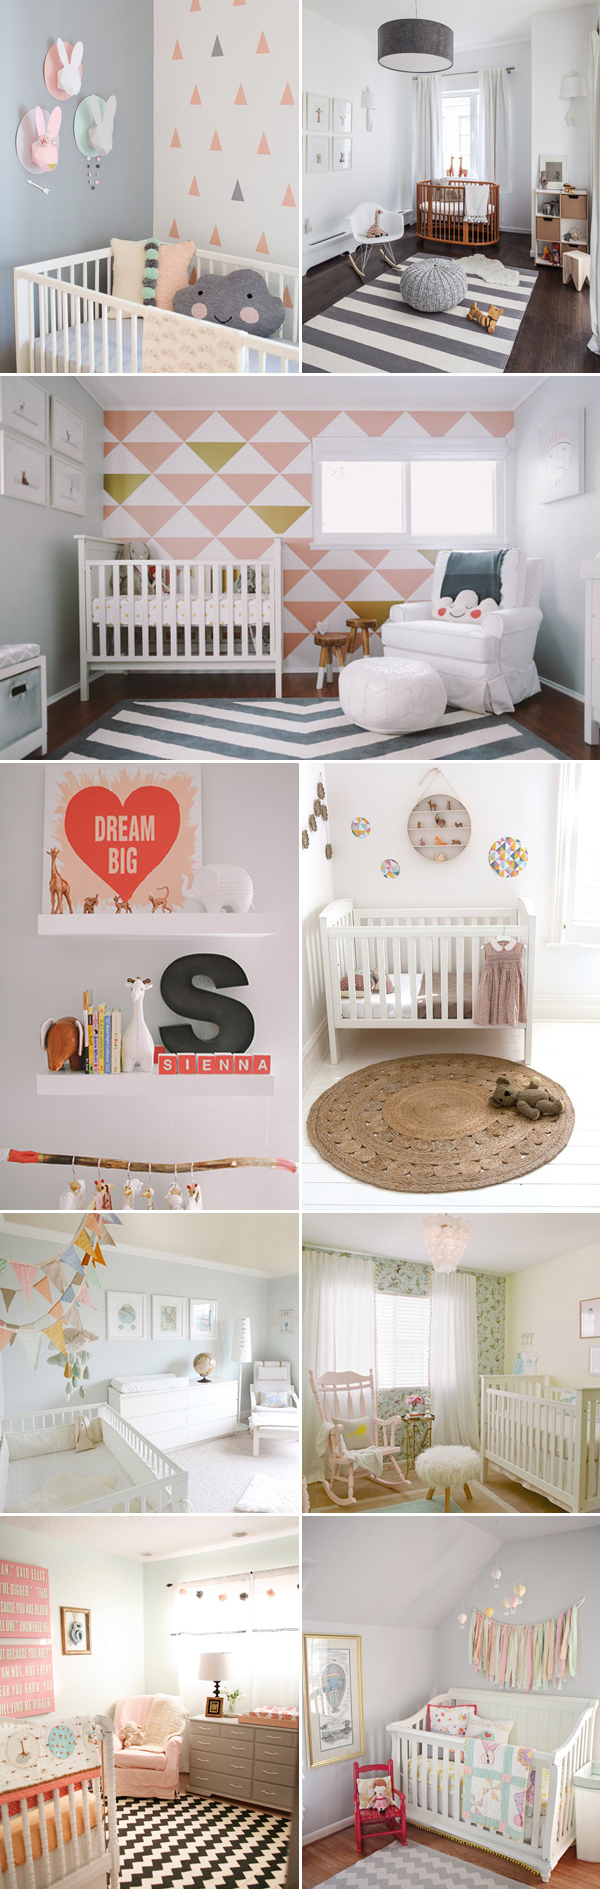 Nusery-Rooms-01-adorable